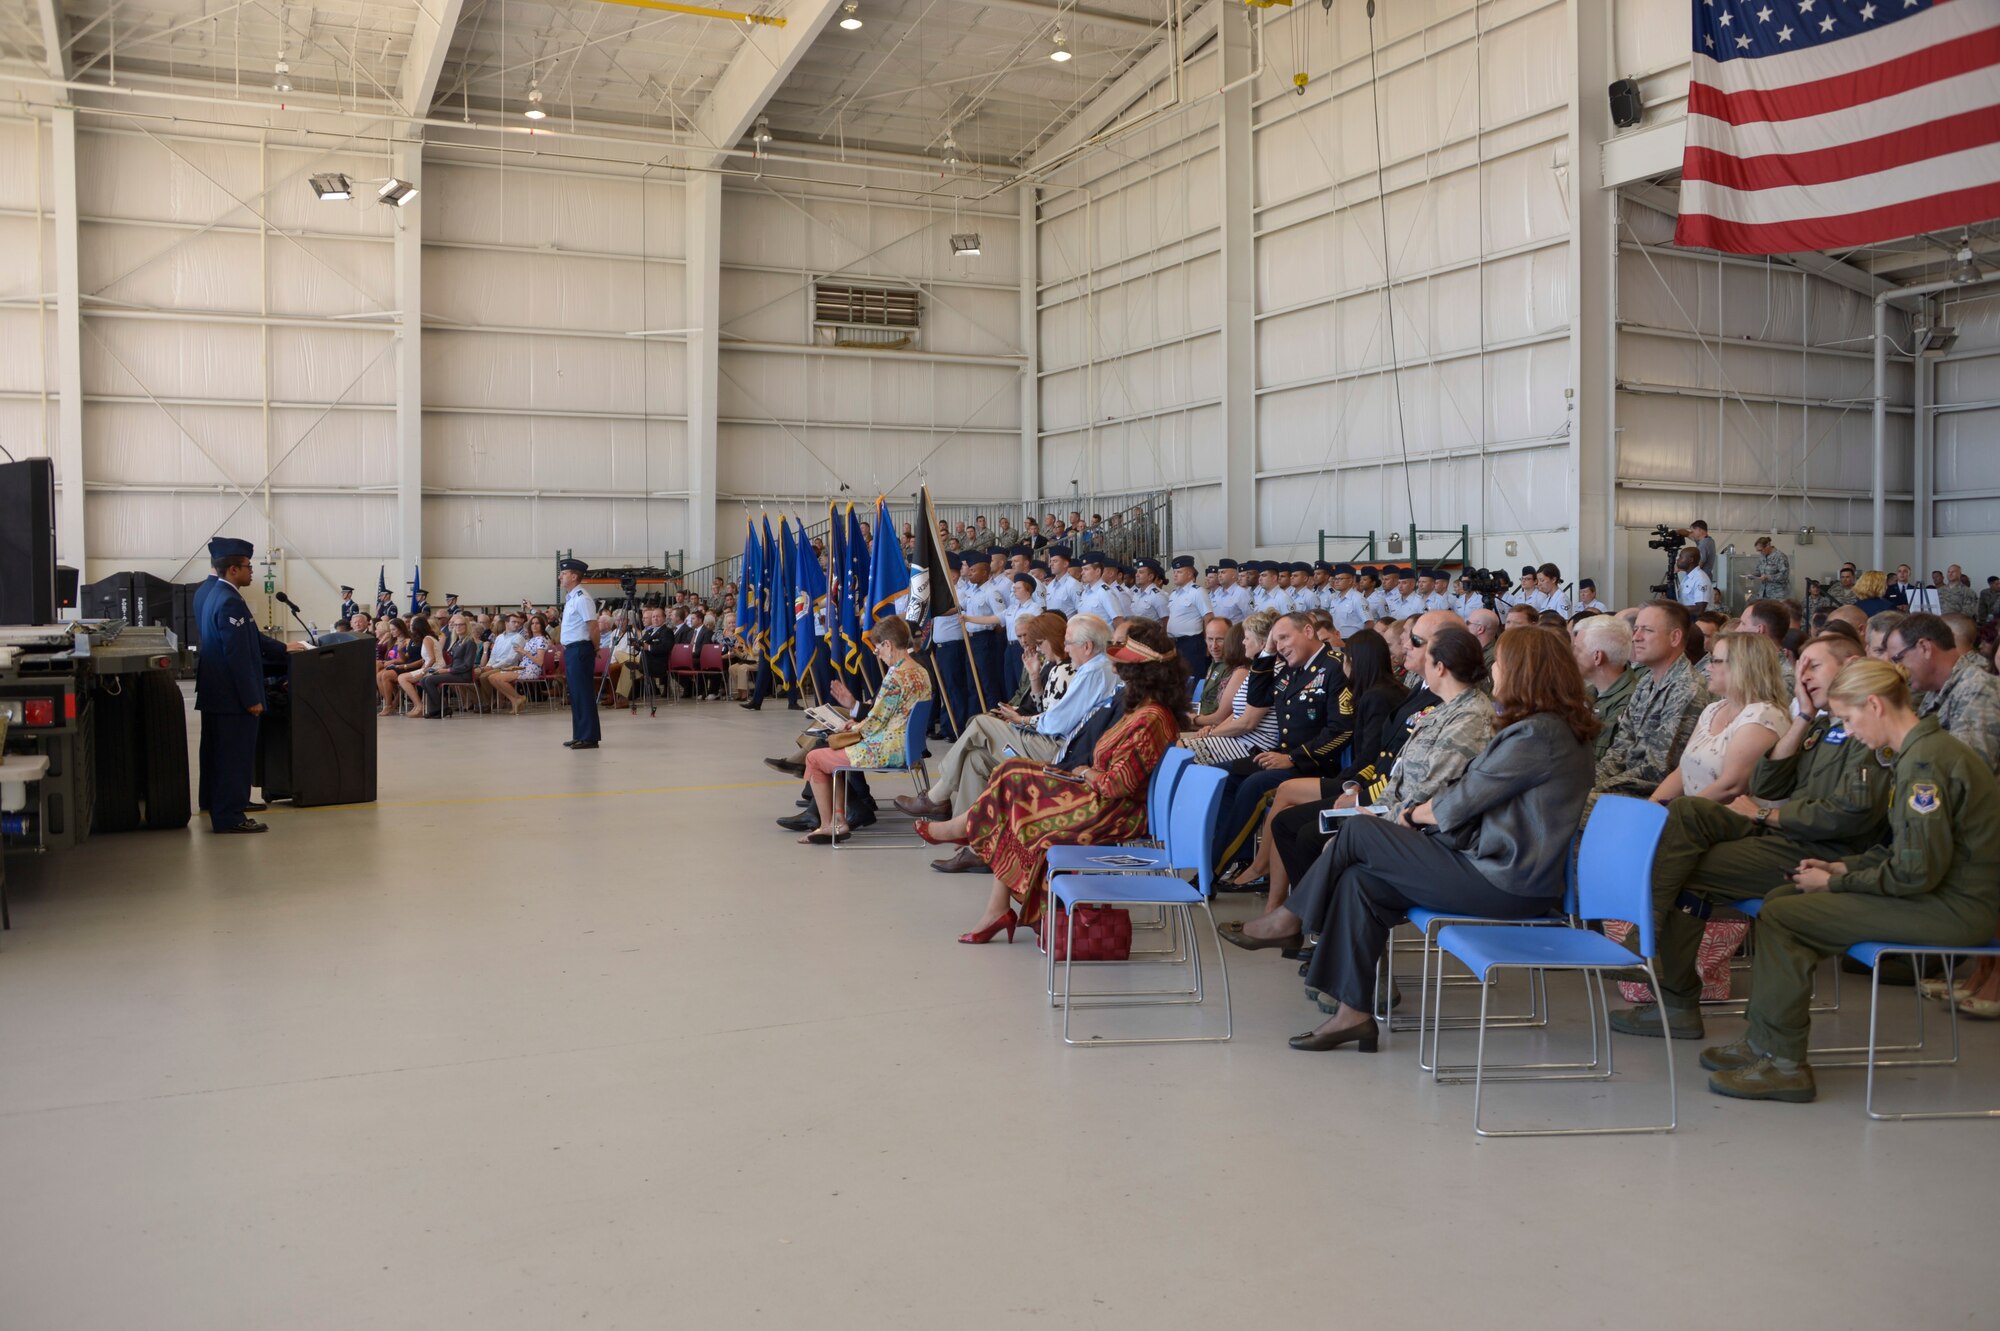 Members of Davis-Monthan Air Force Base and civic leaders gather together for the Twelfth Air Force (Air Forces Southern) change of command ceremony Oct. 3, 2016. During the ceremony, Lt. Gen. Chris Nowland relinquished command to Lt. Gen. Mark Kelly. Air Forces Southern serves as the air component to U.S. Southern Command and is responsible for providing air and space capabilities in support of U.S. military partnerships across Central and South America, and the Caribbean. (U.S. Air Force photo by Tech. Sgt. Heather Redman)